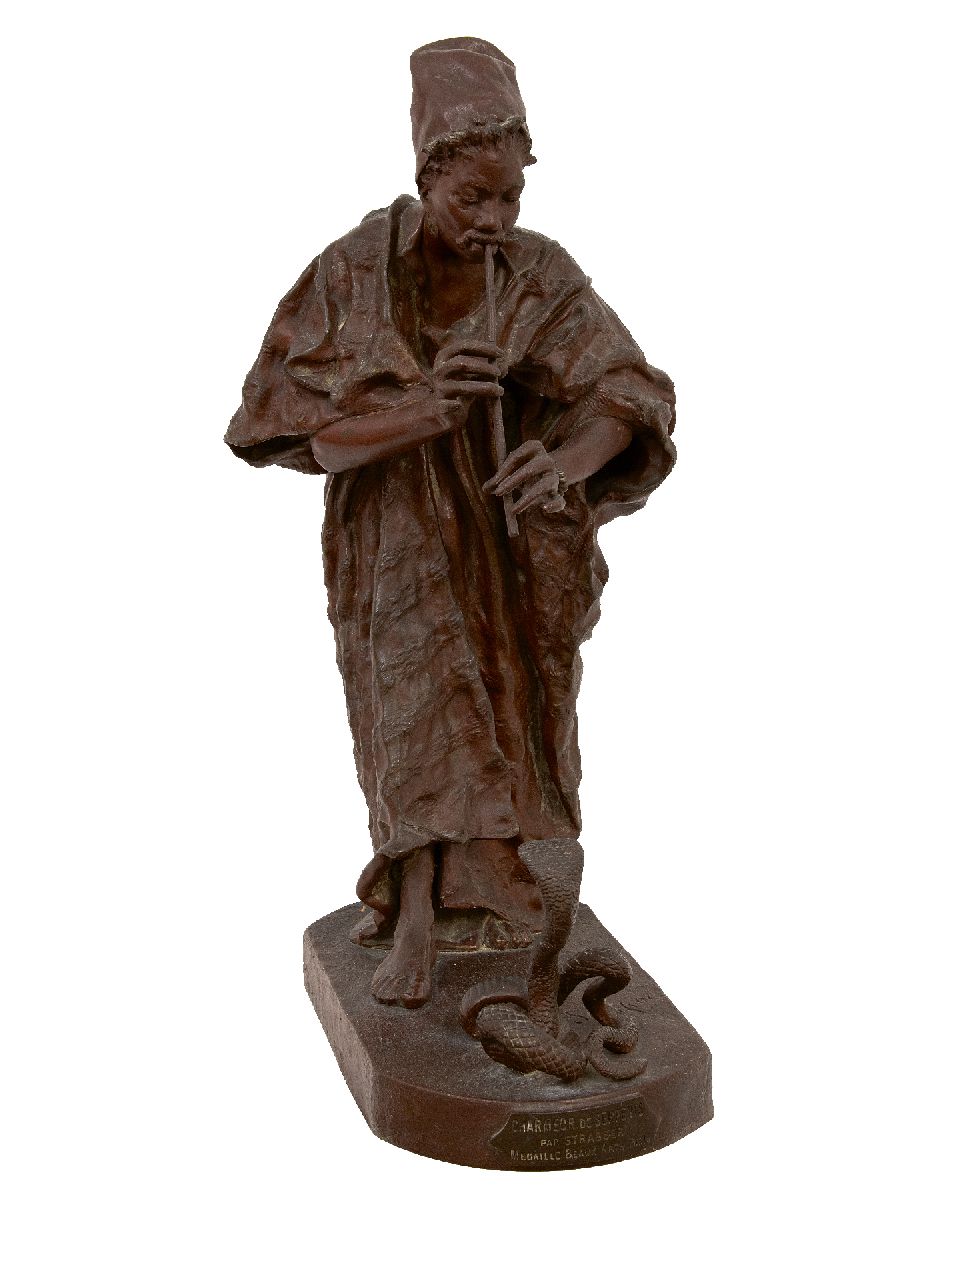 Strasser A.  | Arthur Strasser | Sculptures and objects offered for sale | -, bronze 48.5 x 26.5 cm